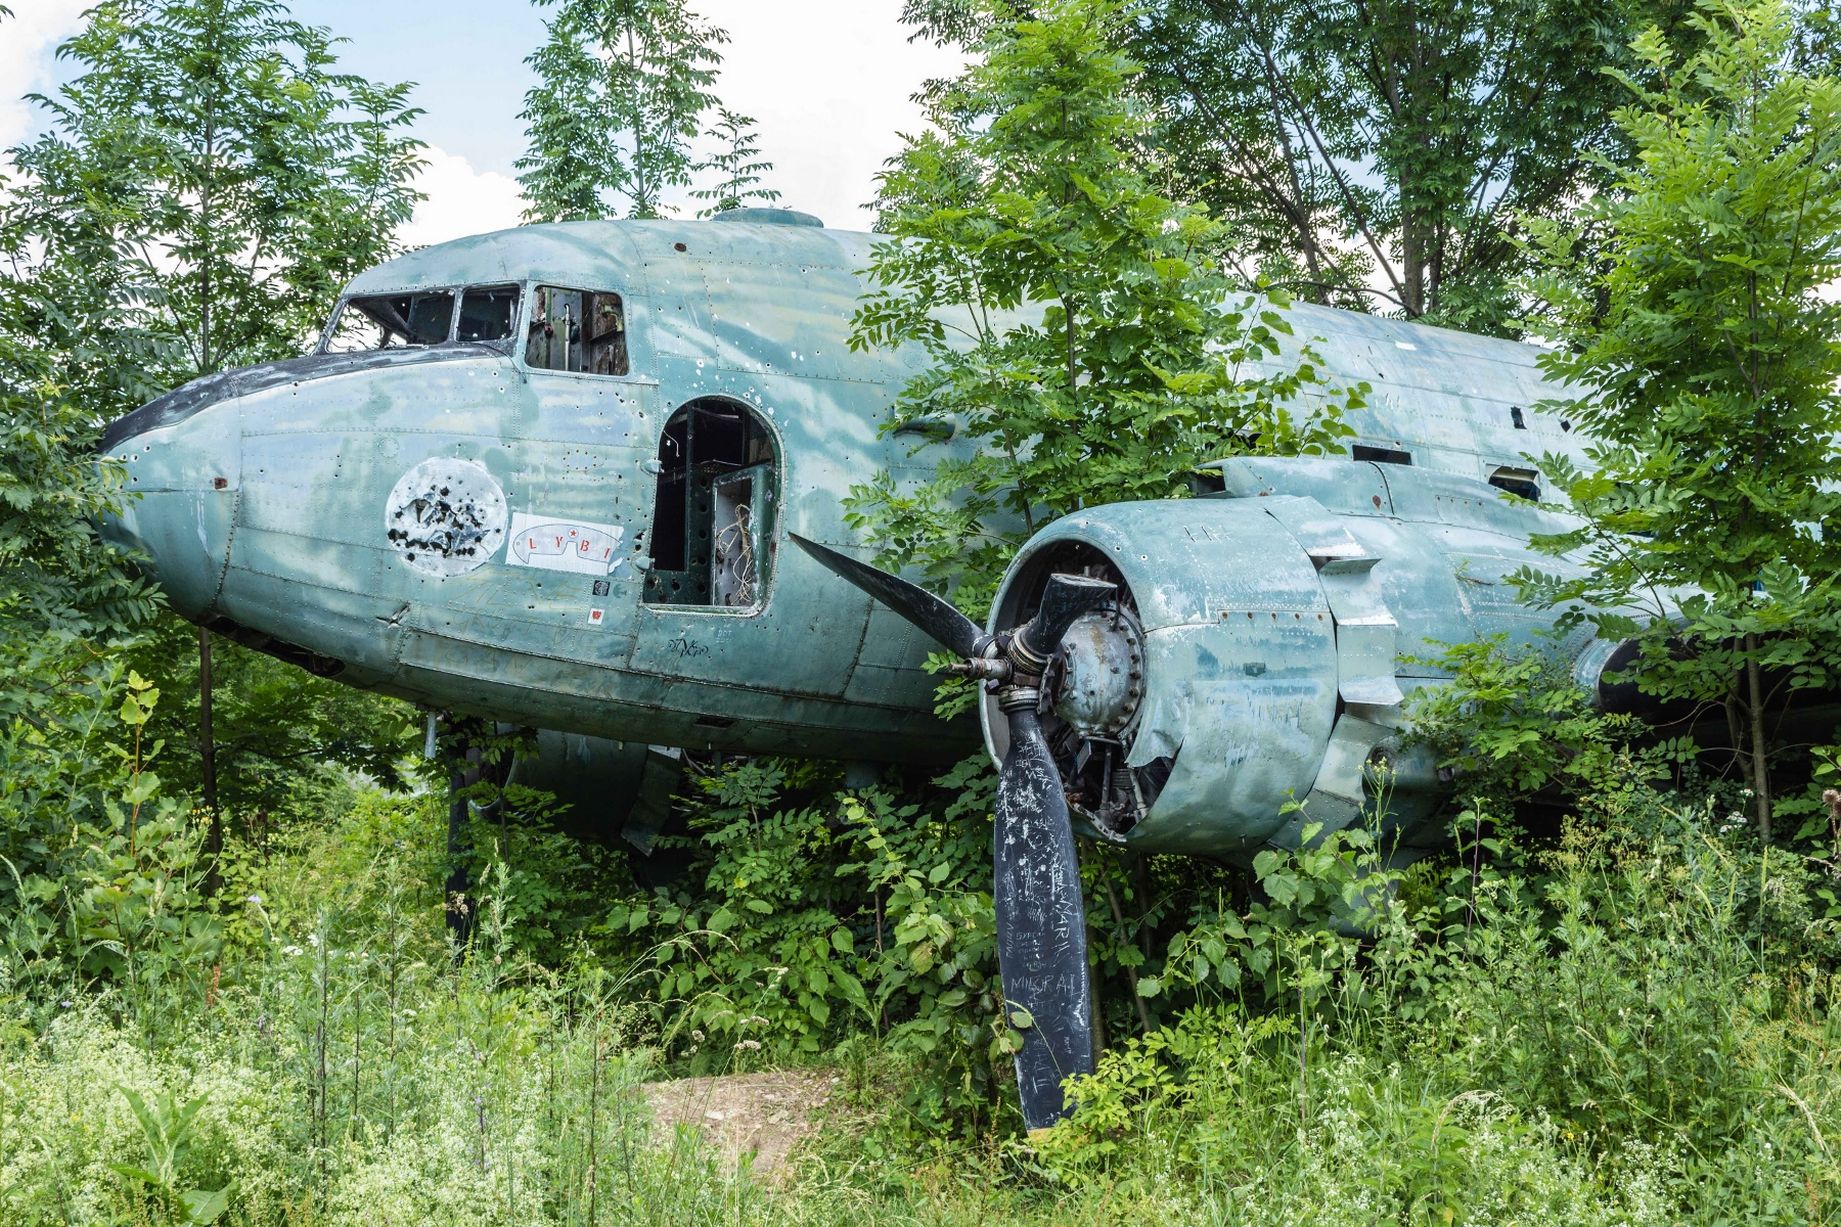 Zelijava and a number of planes were abandoned during the Croatian War of Independence in 1992